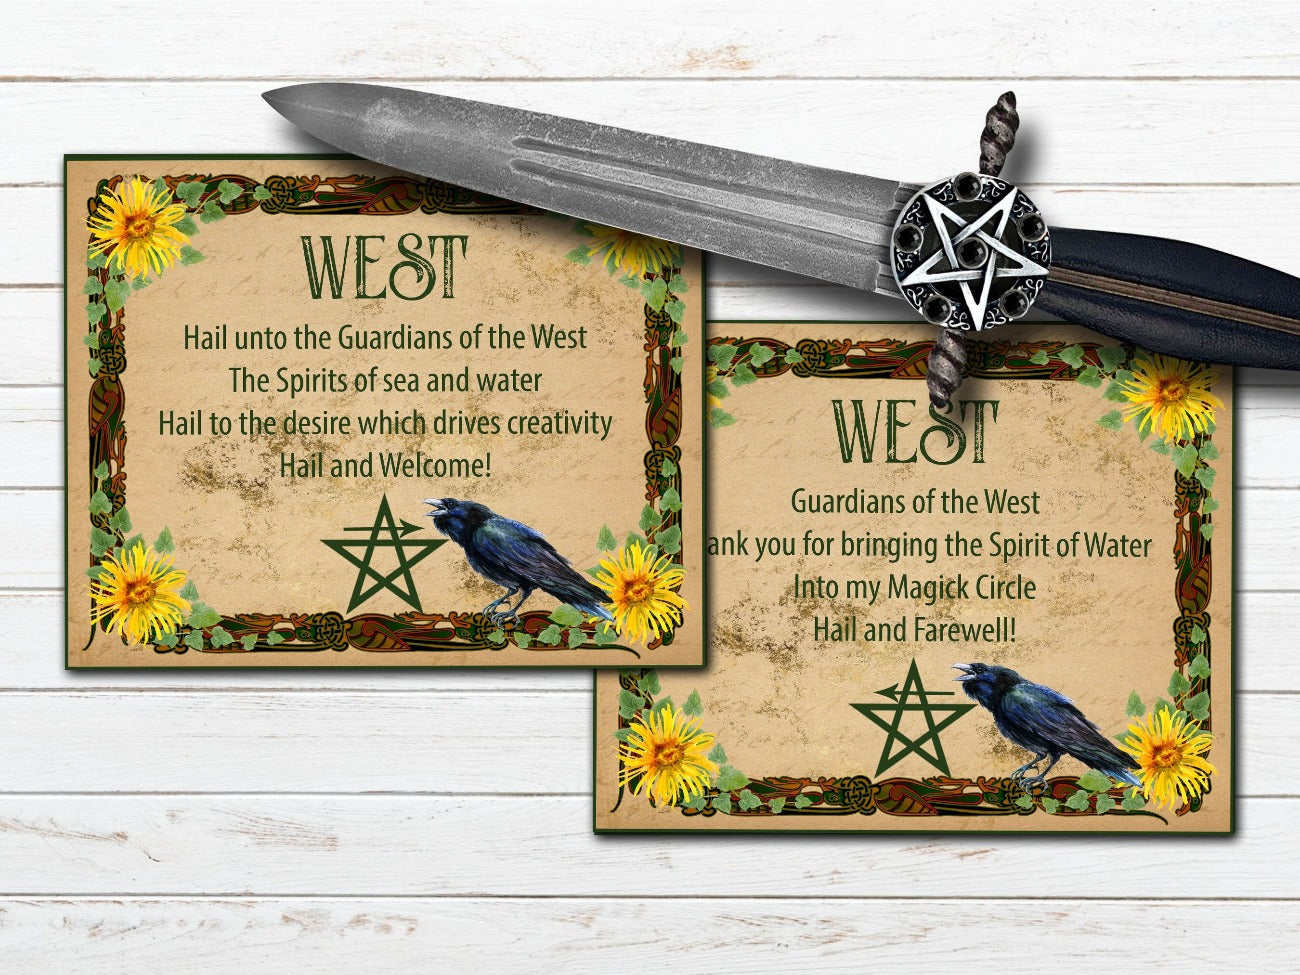 West Invoking and Banishing Quarter Cards. Each card has a floral border with a crow and pentacle with an arrow indicating the correct way to draw it.